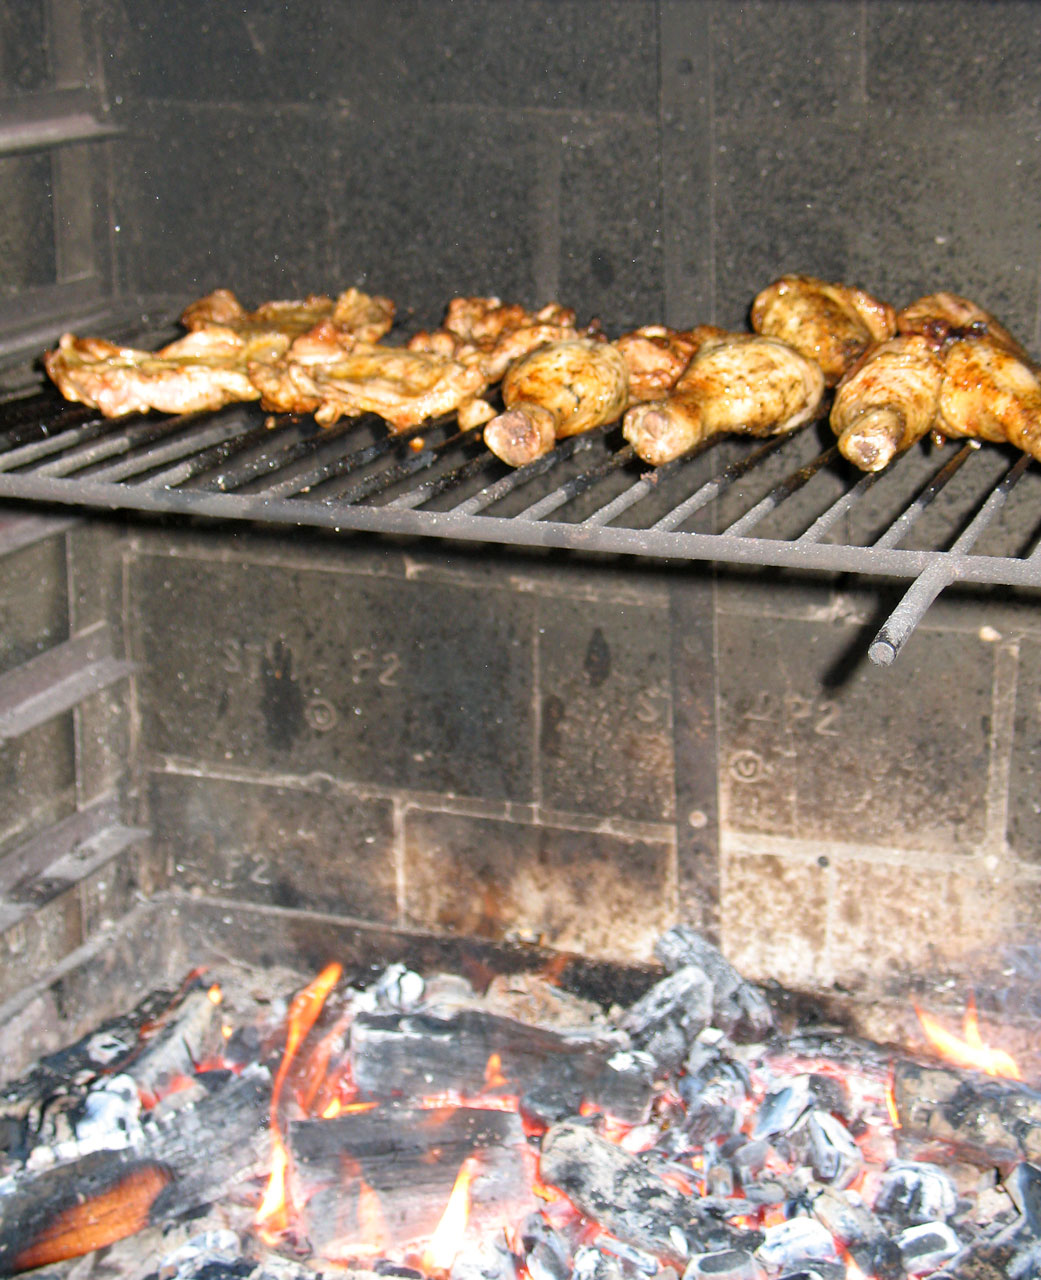 Delicious roasted chicken above the fire